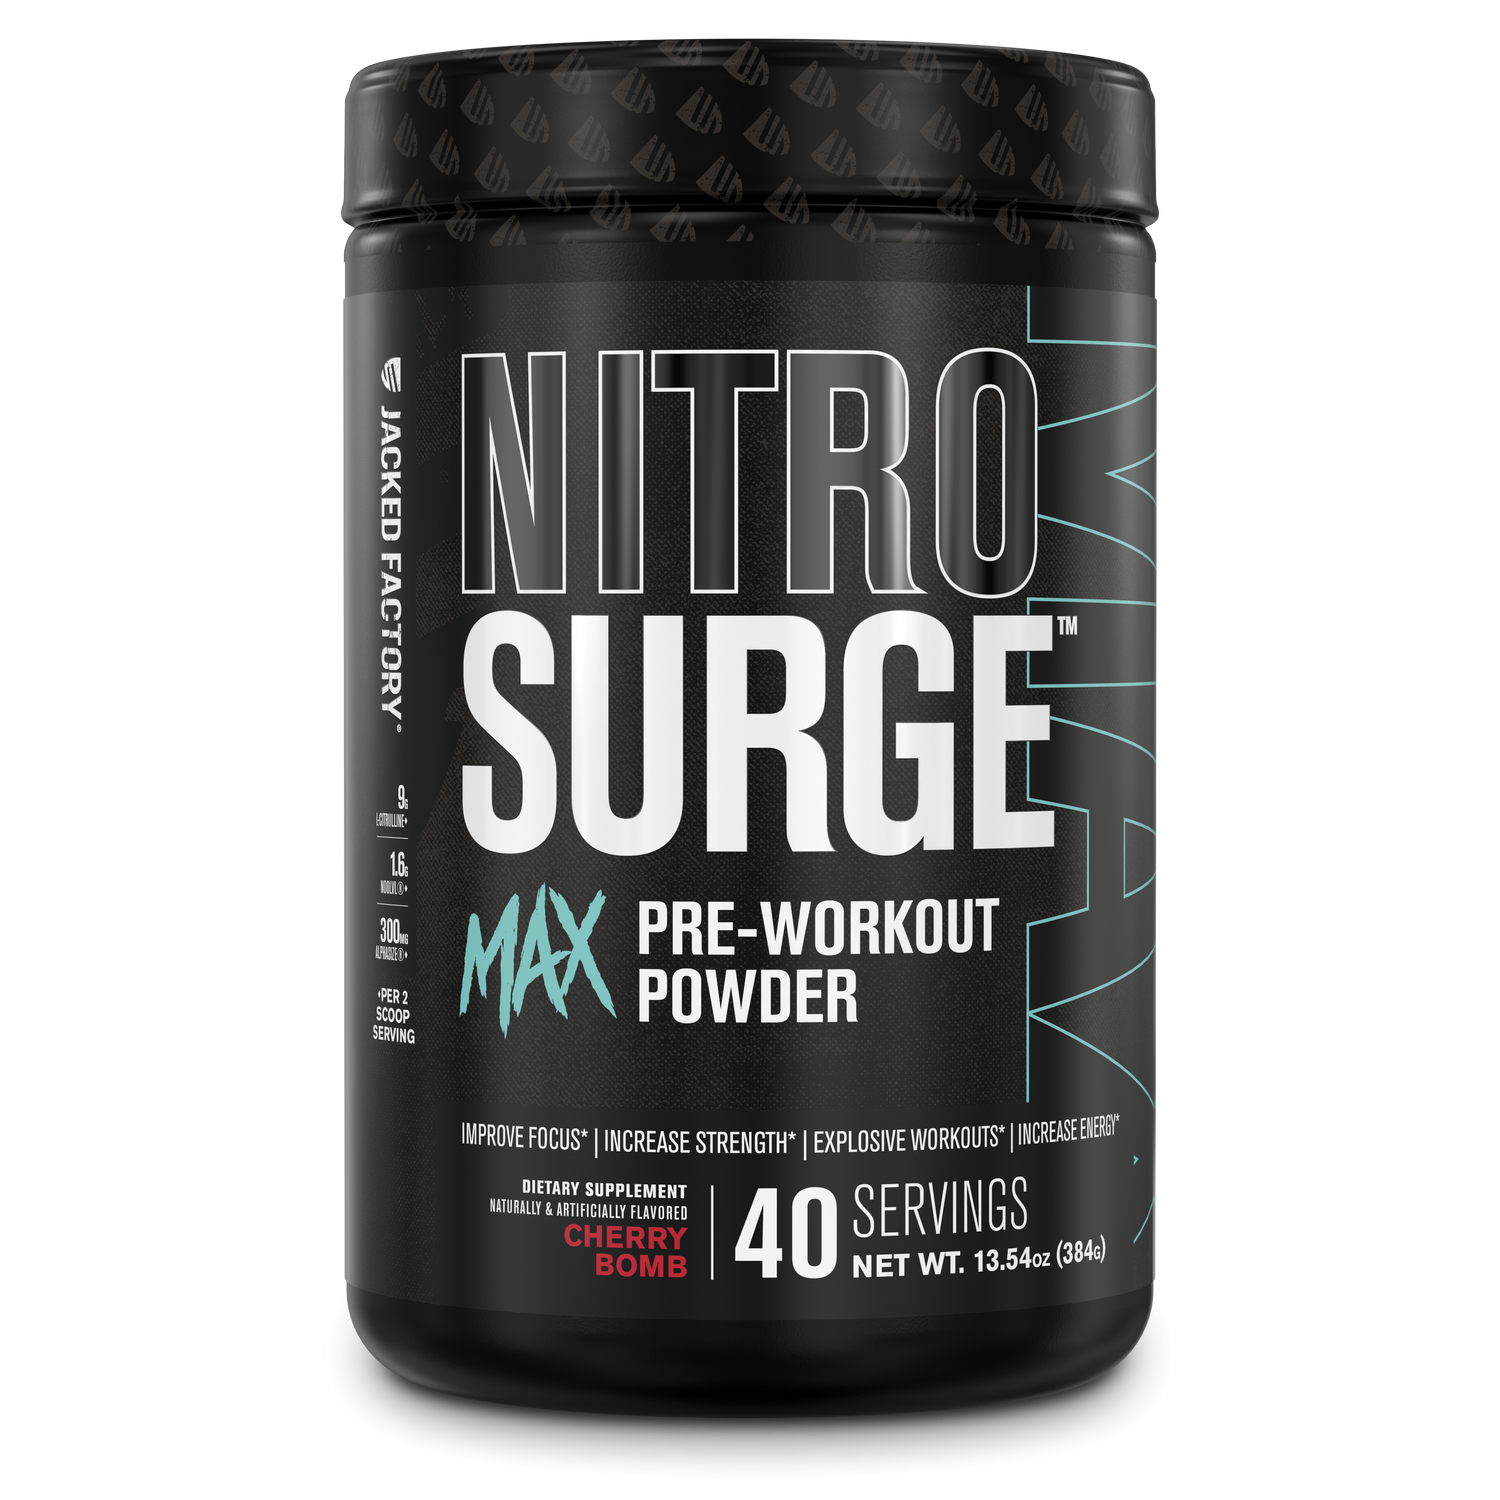 Jacked Factory Nitrosurge MAX Pre Workout Powder (40 servings) Cherry Bomb in a black tub with a black label and black lid